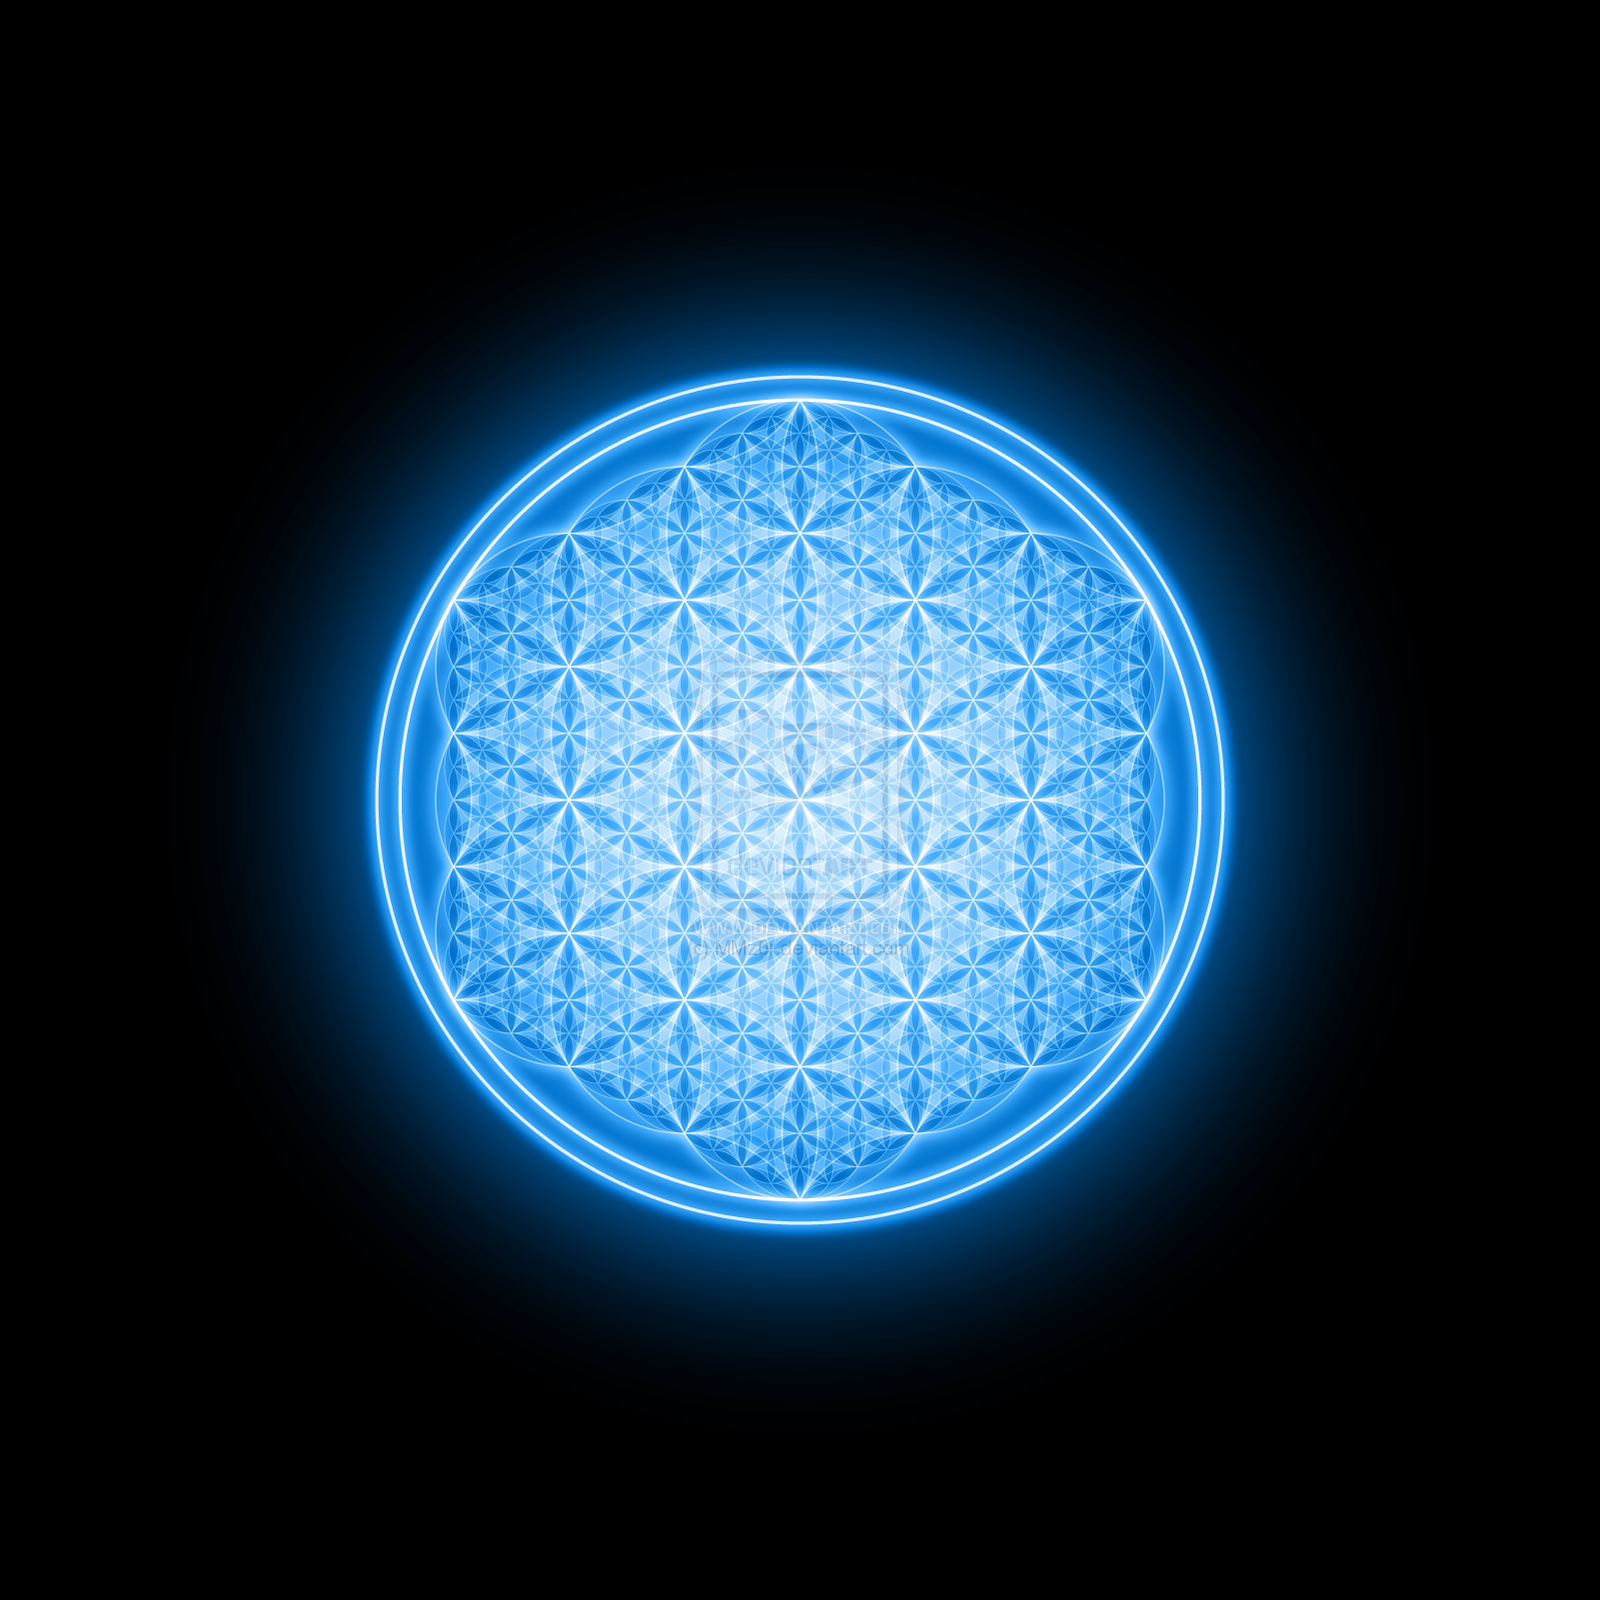 The flower of life by MMz0r on